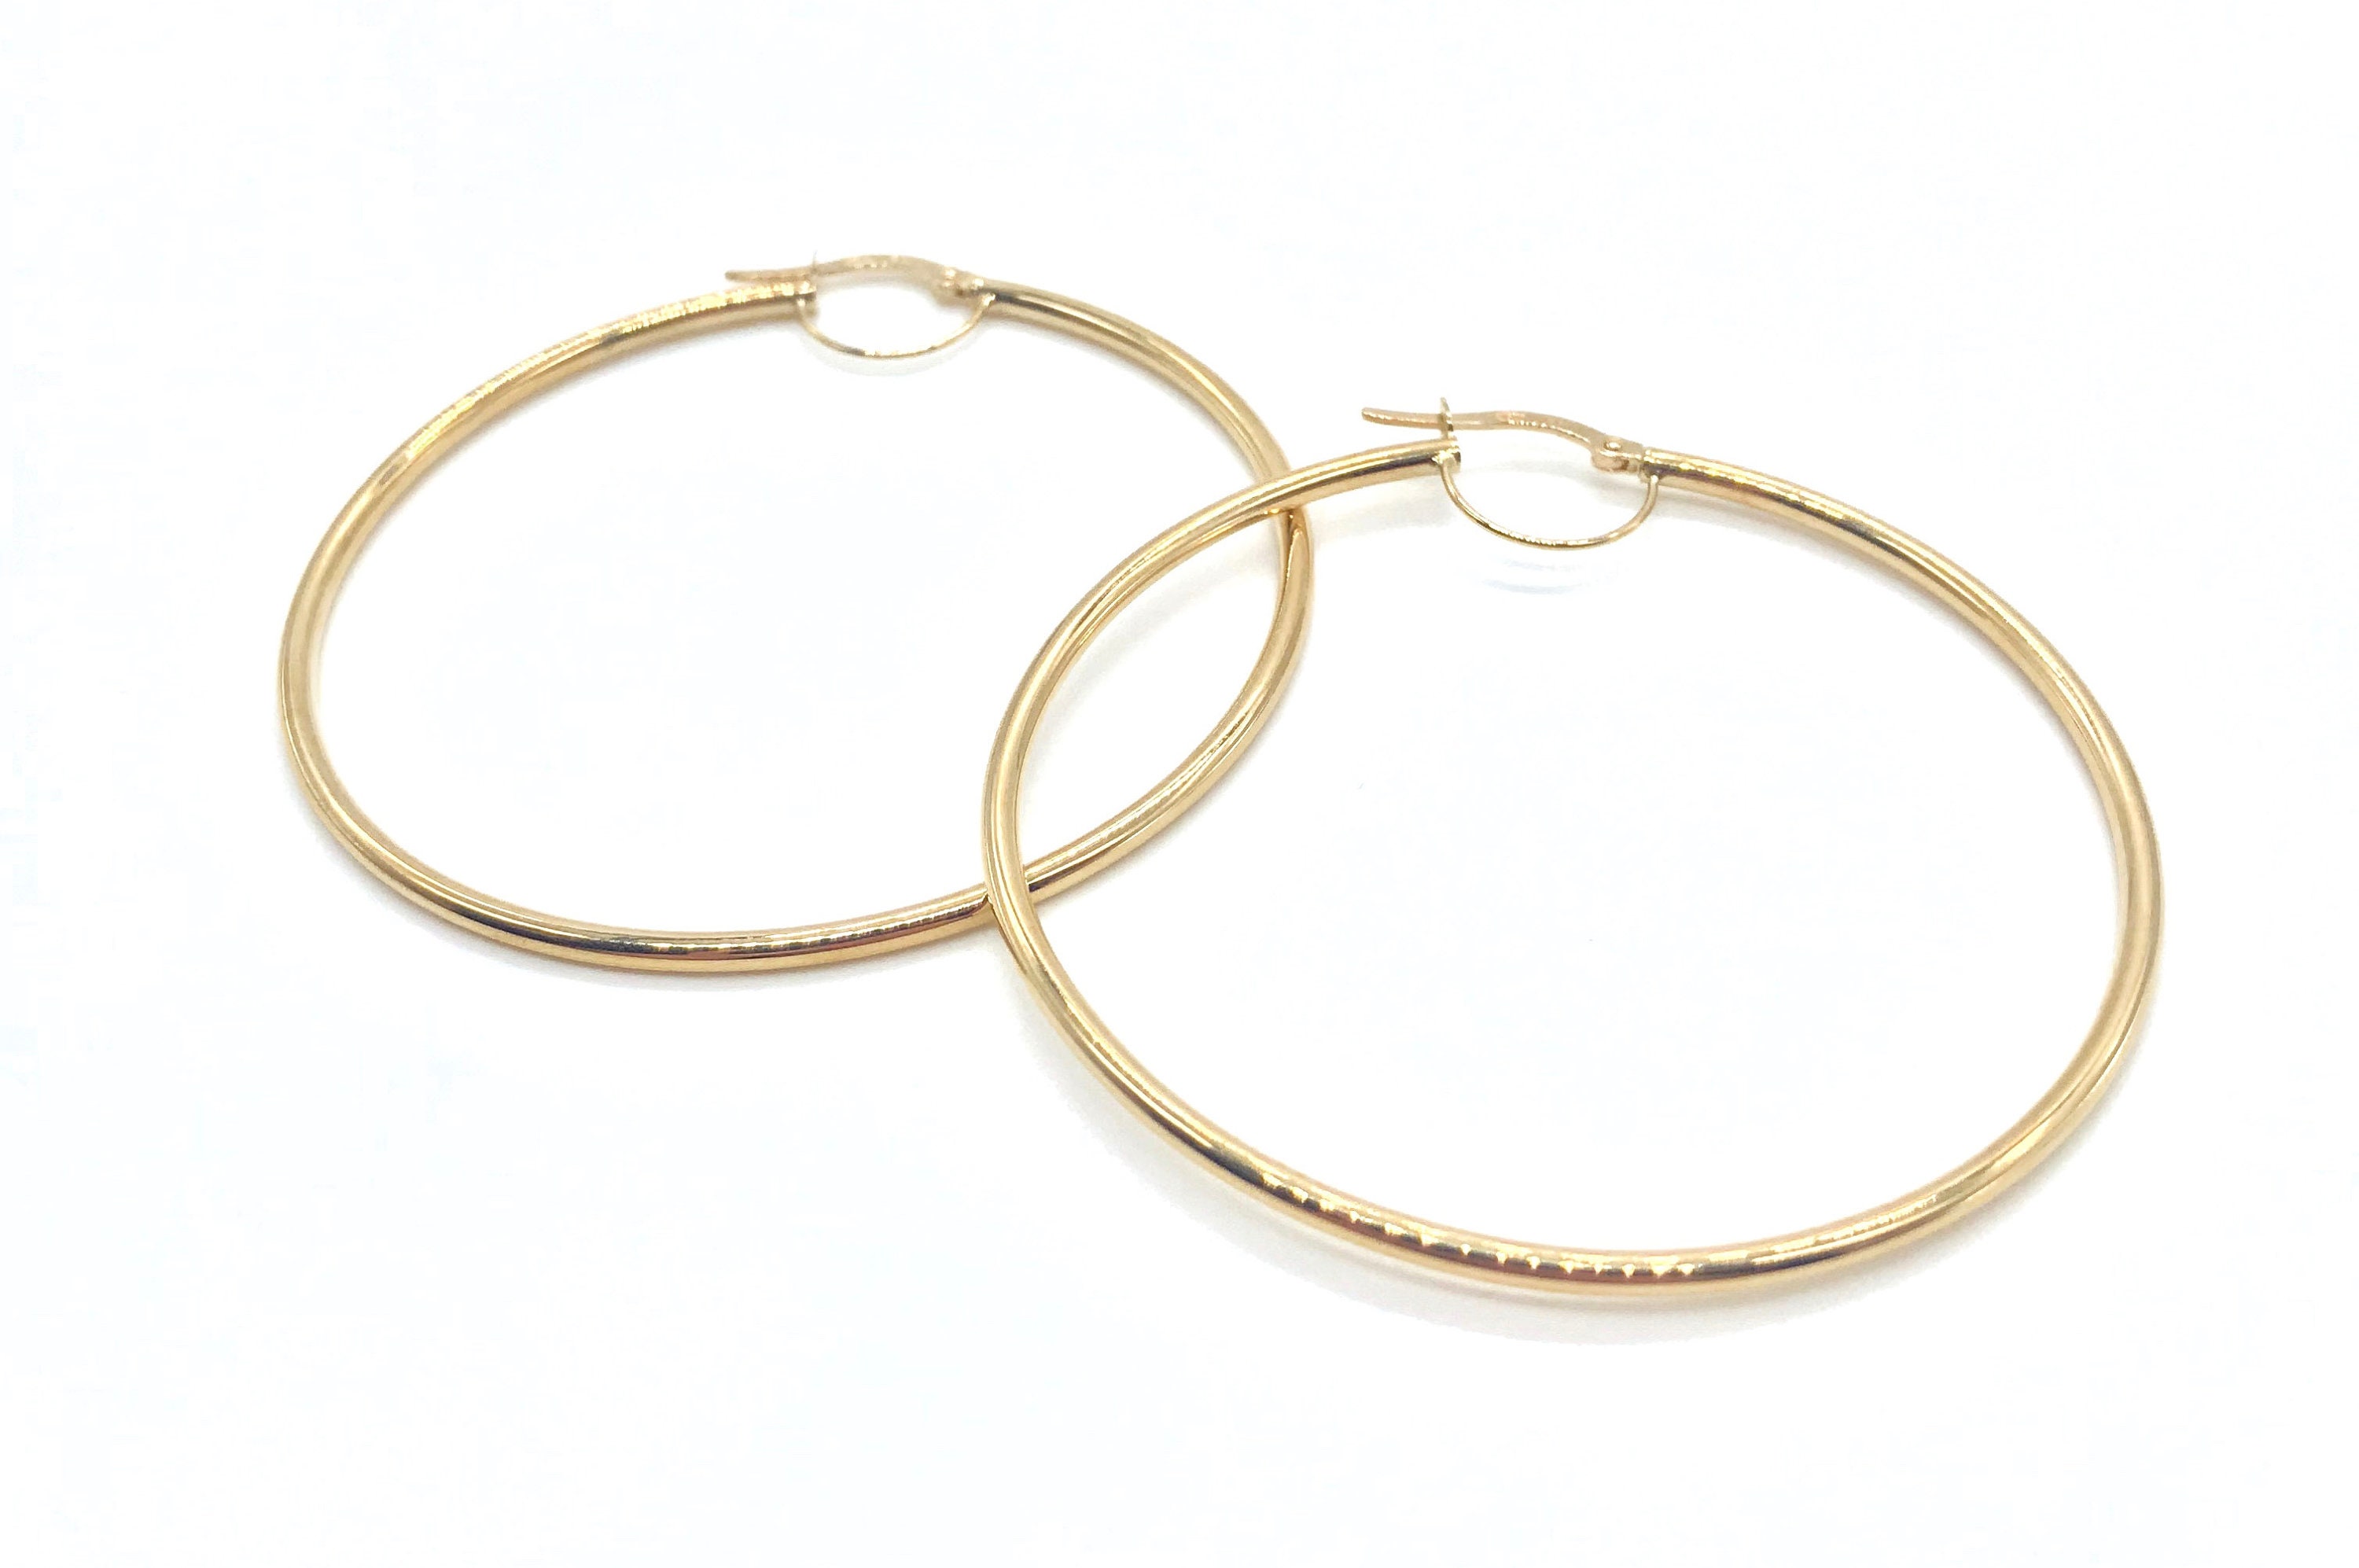 18K Yellow Large Hoop Earrings Polished Gold Handmade By Artisans Women's Gift For Her Made in Italy